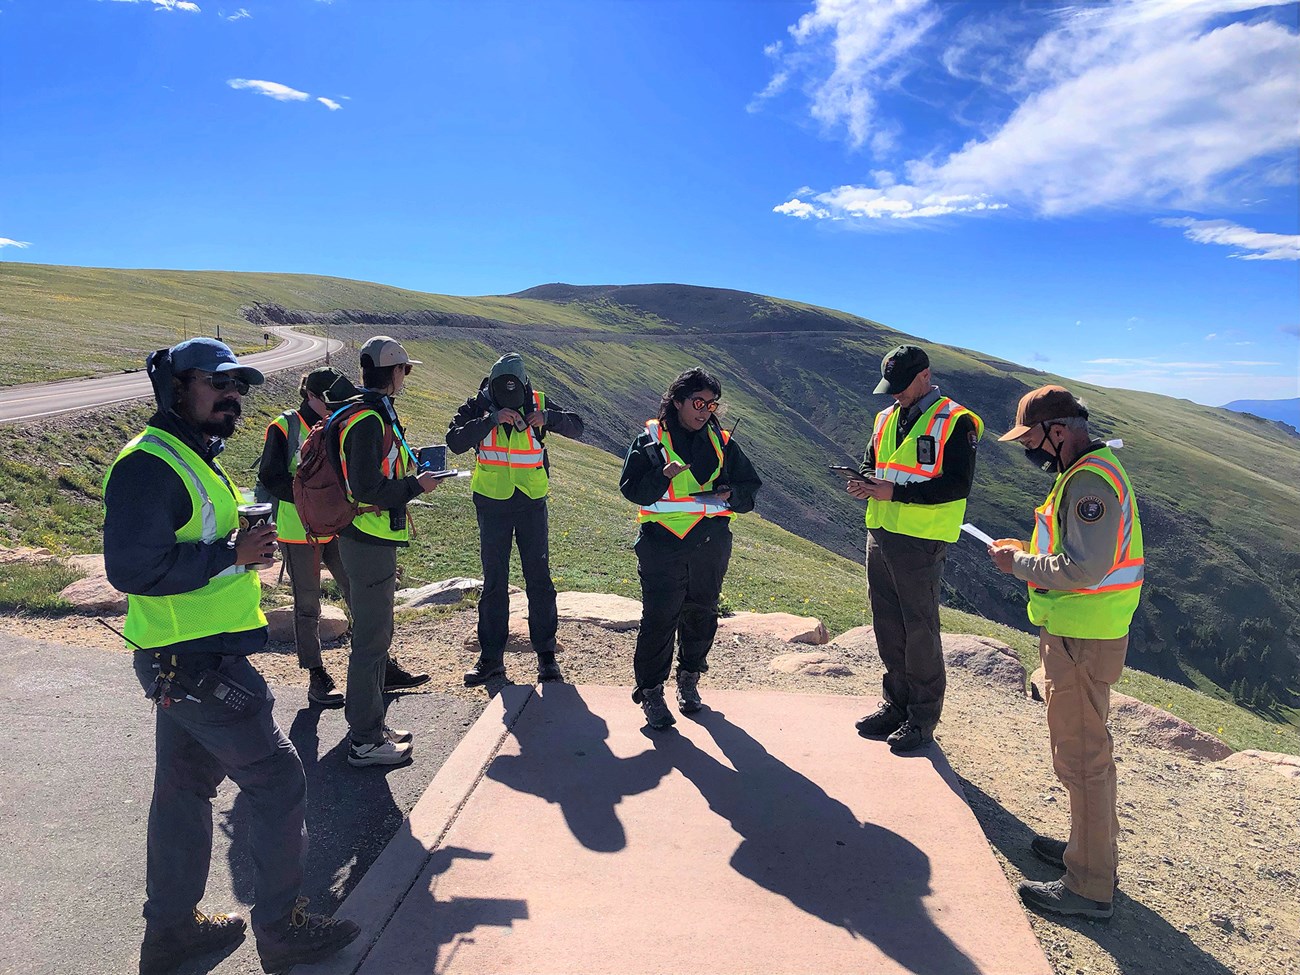 A group of people in safety vests stand in a circle talking against an alpine backdrop